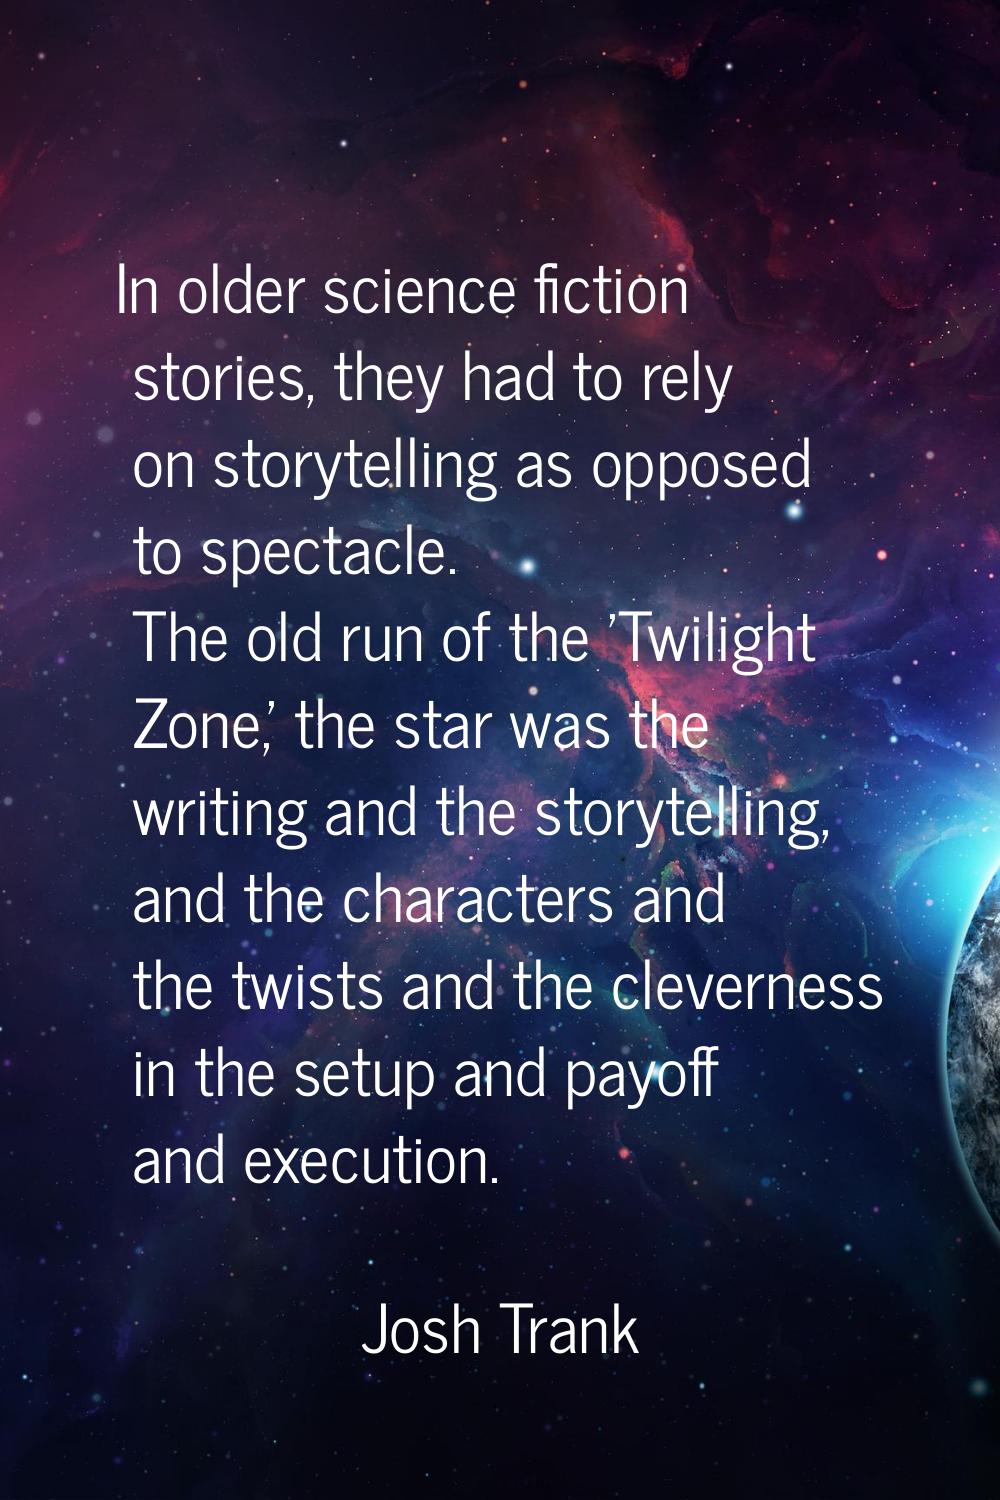 In older science fiction stories, they had to rely on storytelling as opposed to spectacle. The old